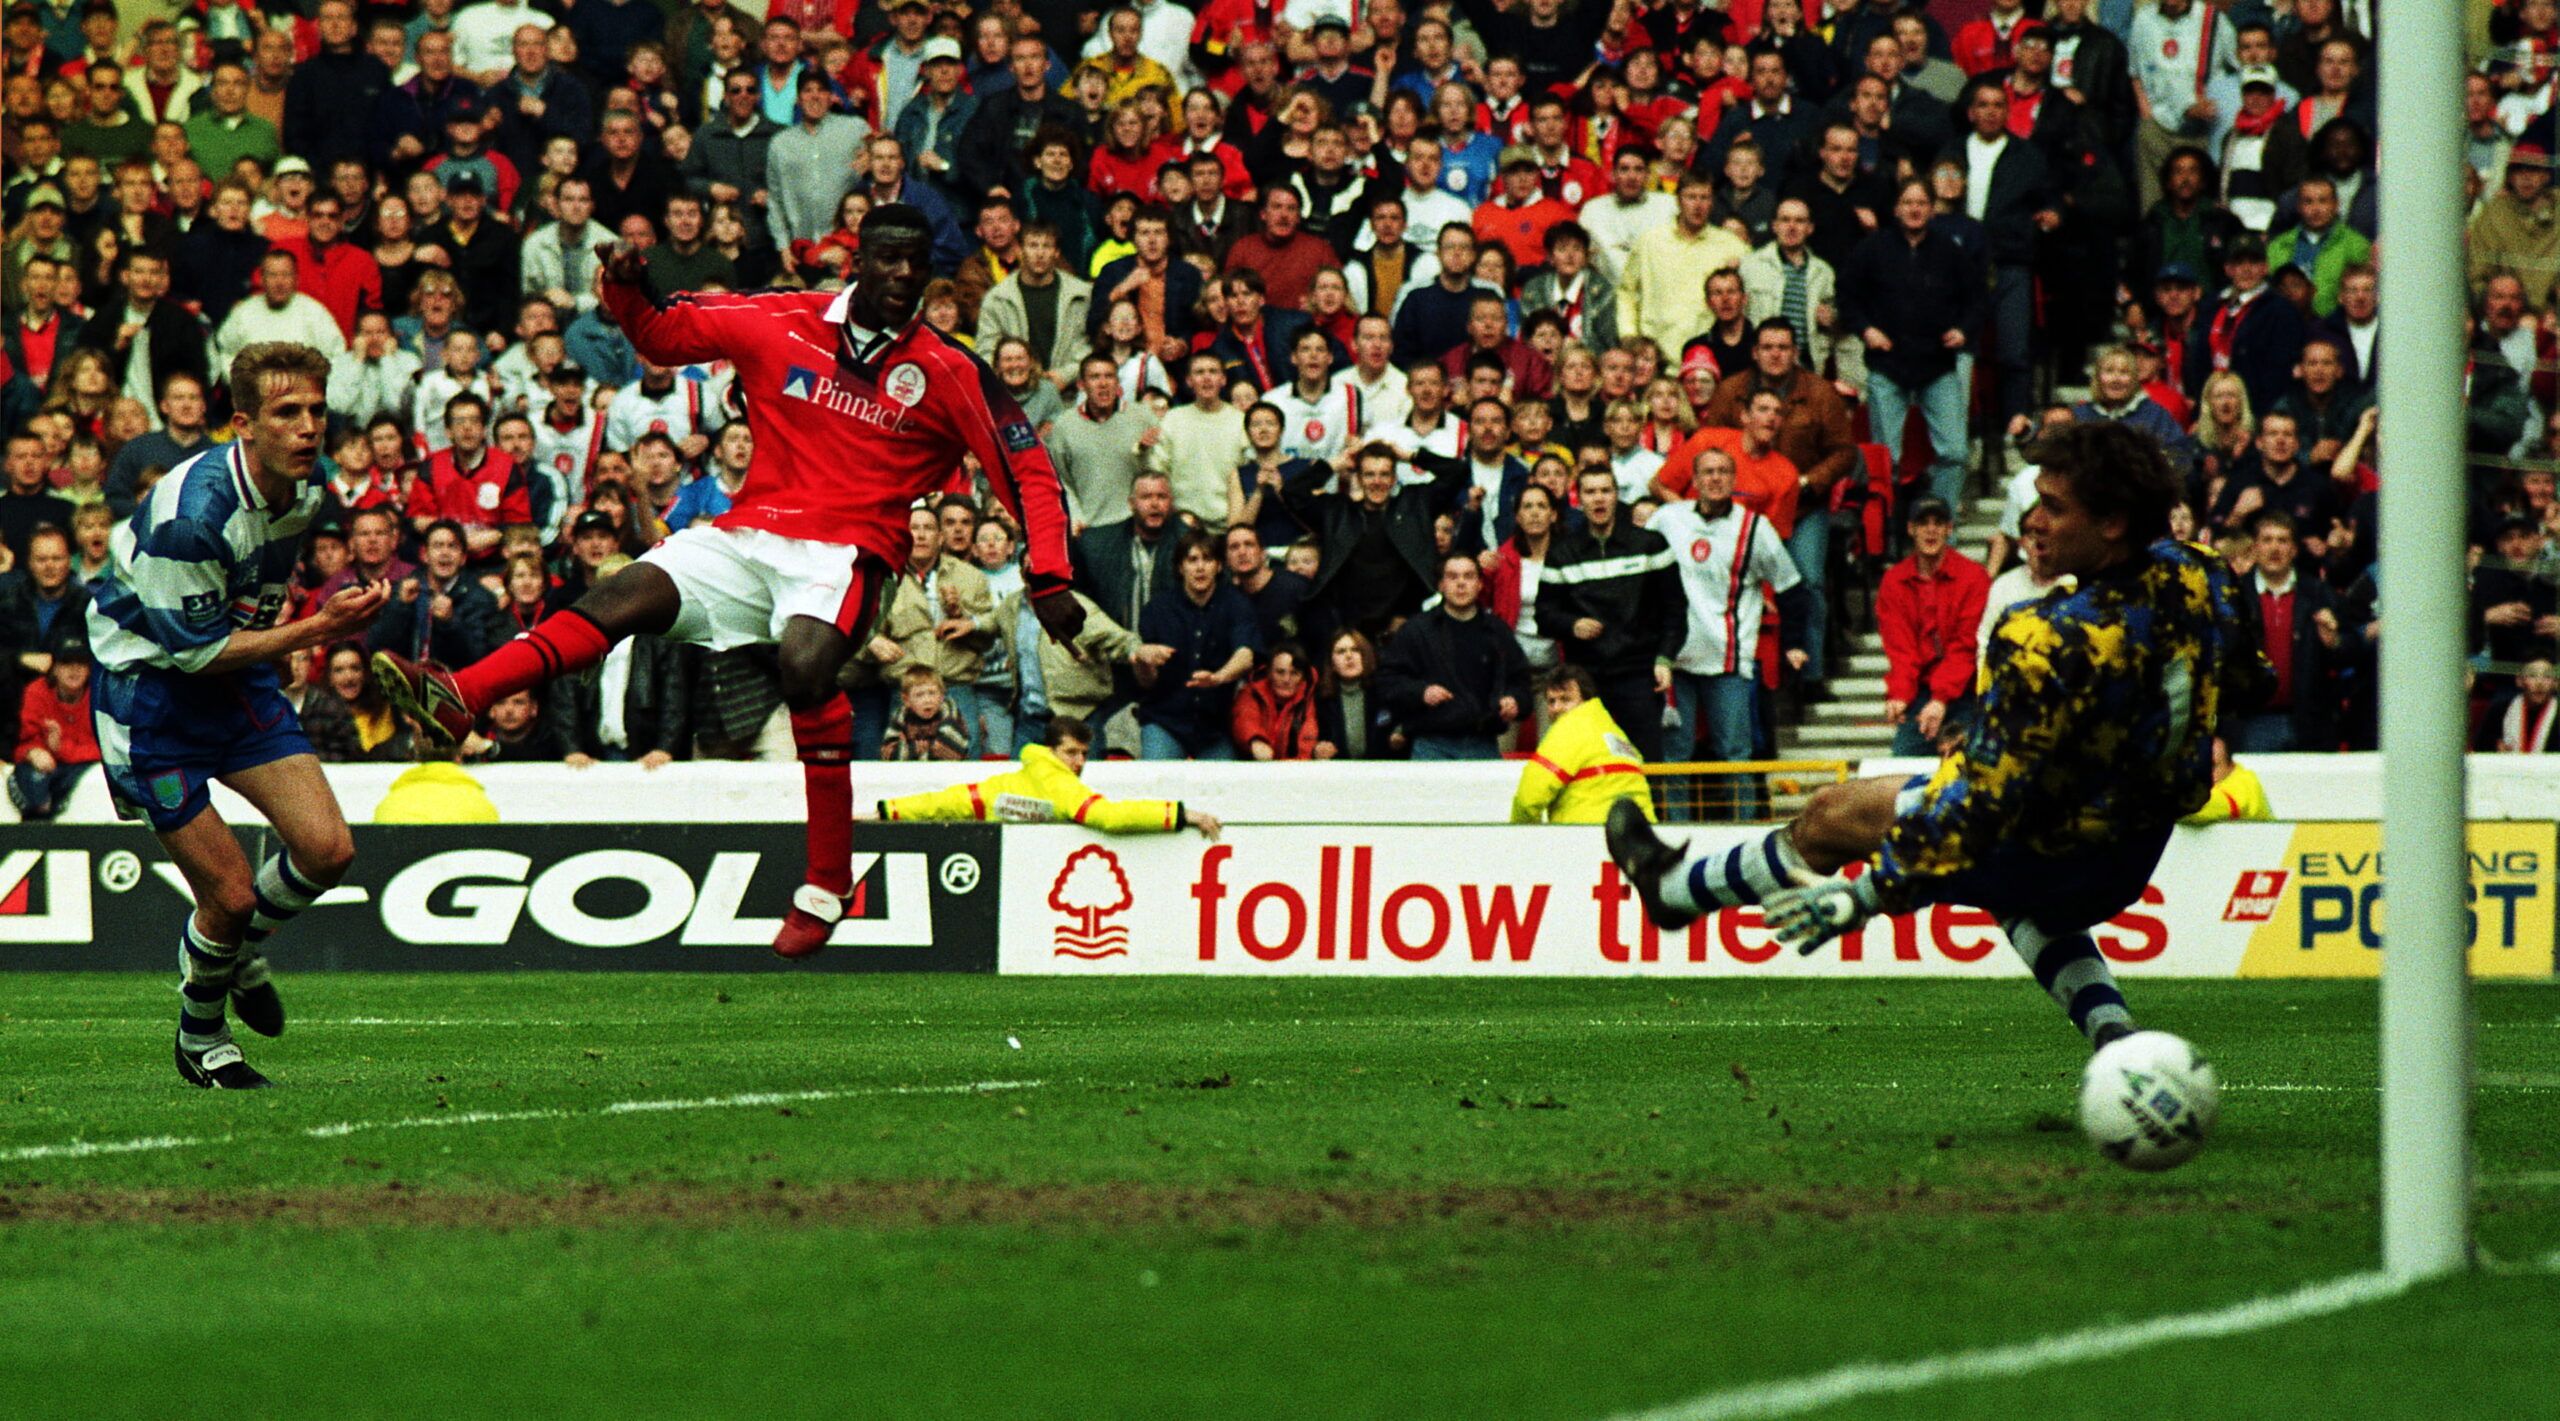 Football - Nottingham Forest v Reading - 97/98 - Division One - The City Ground - 26/4/98 
Chris Bart Williams - Nottingham Forest scores 
Mandatory Credit: Action Images